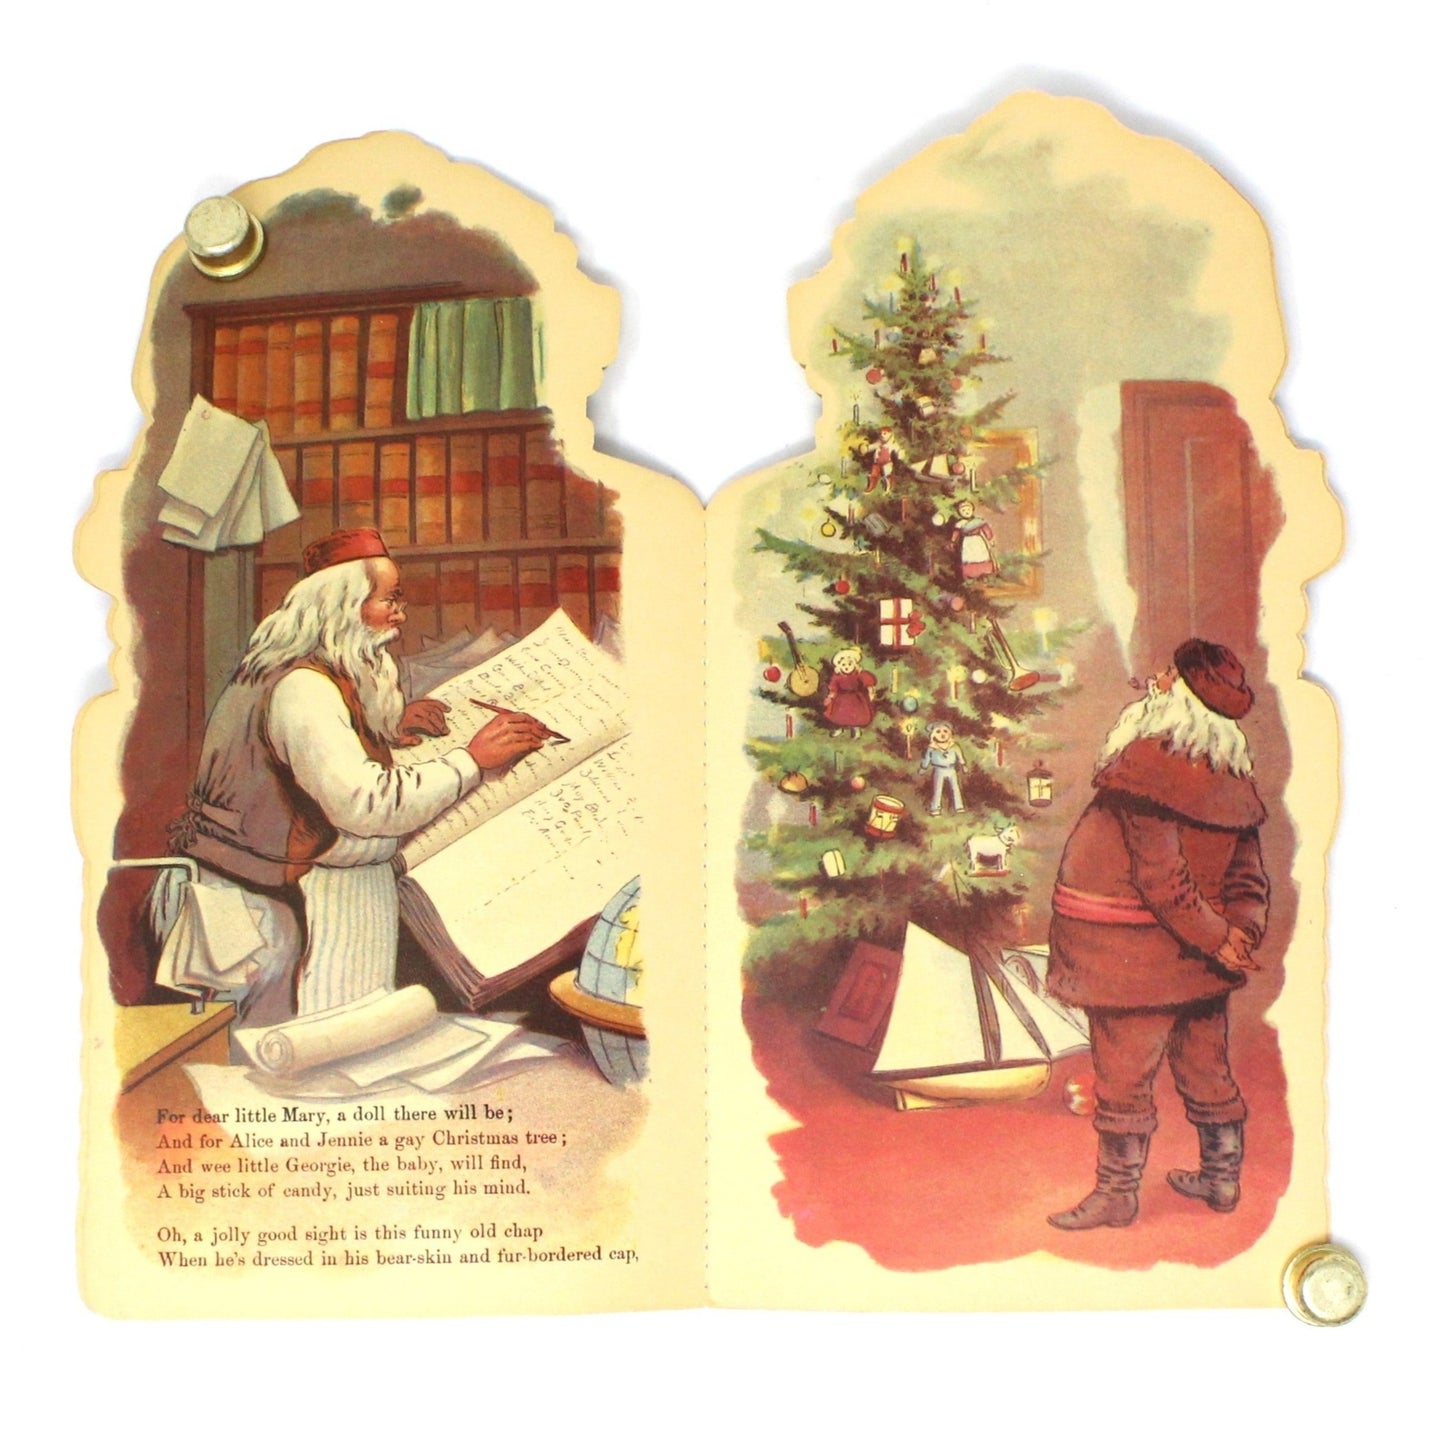 Children's Book, Merrimack Publishing, All About Santa Claus, Softcover Die-Cut, Vintage